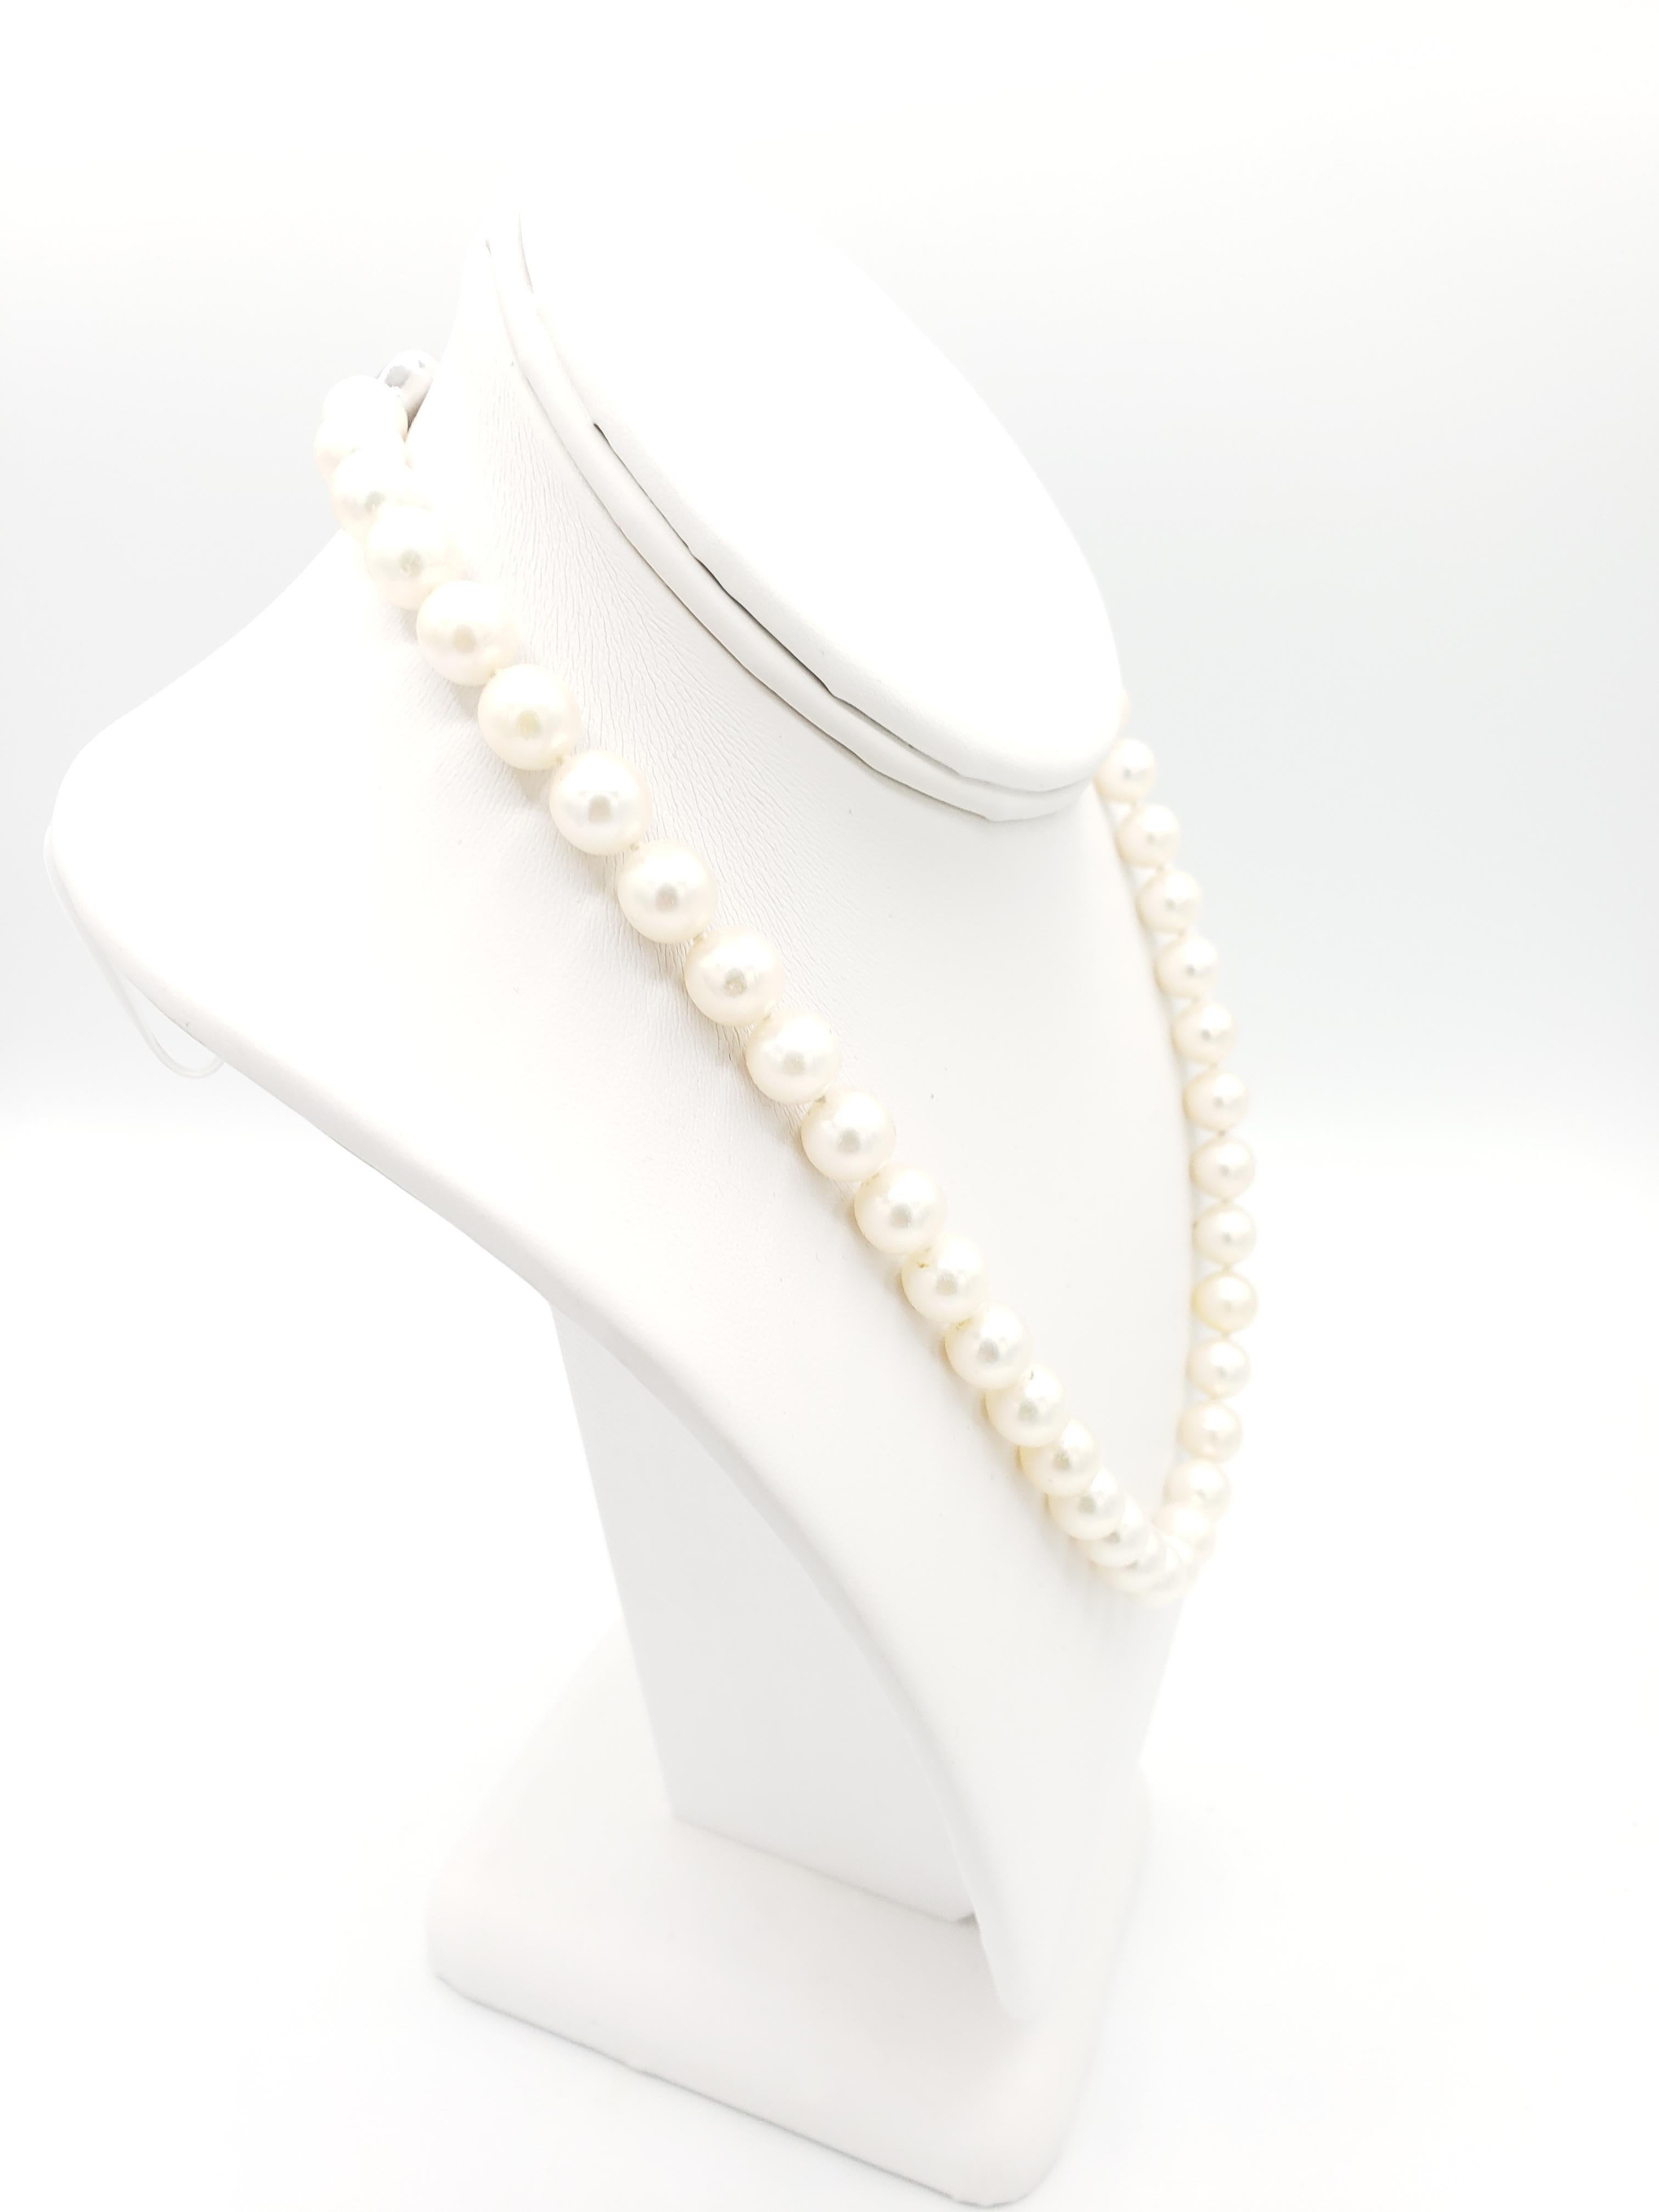 Victorian NEW AAA+ Quality Japanese Akoya Salt Water White Pearl Necklace For Sale